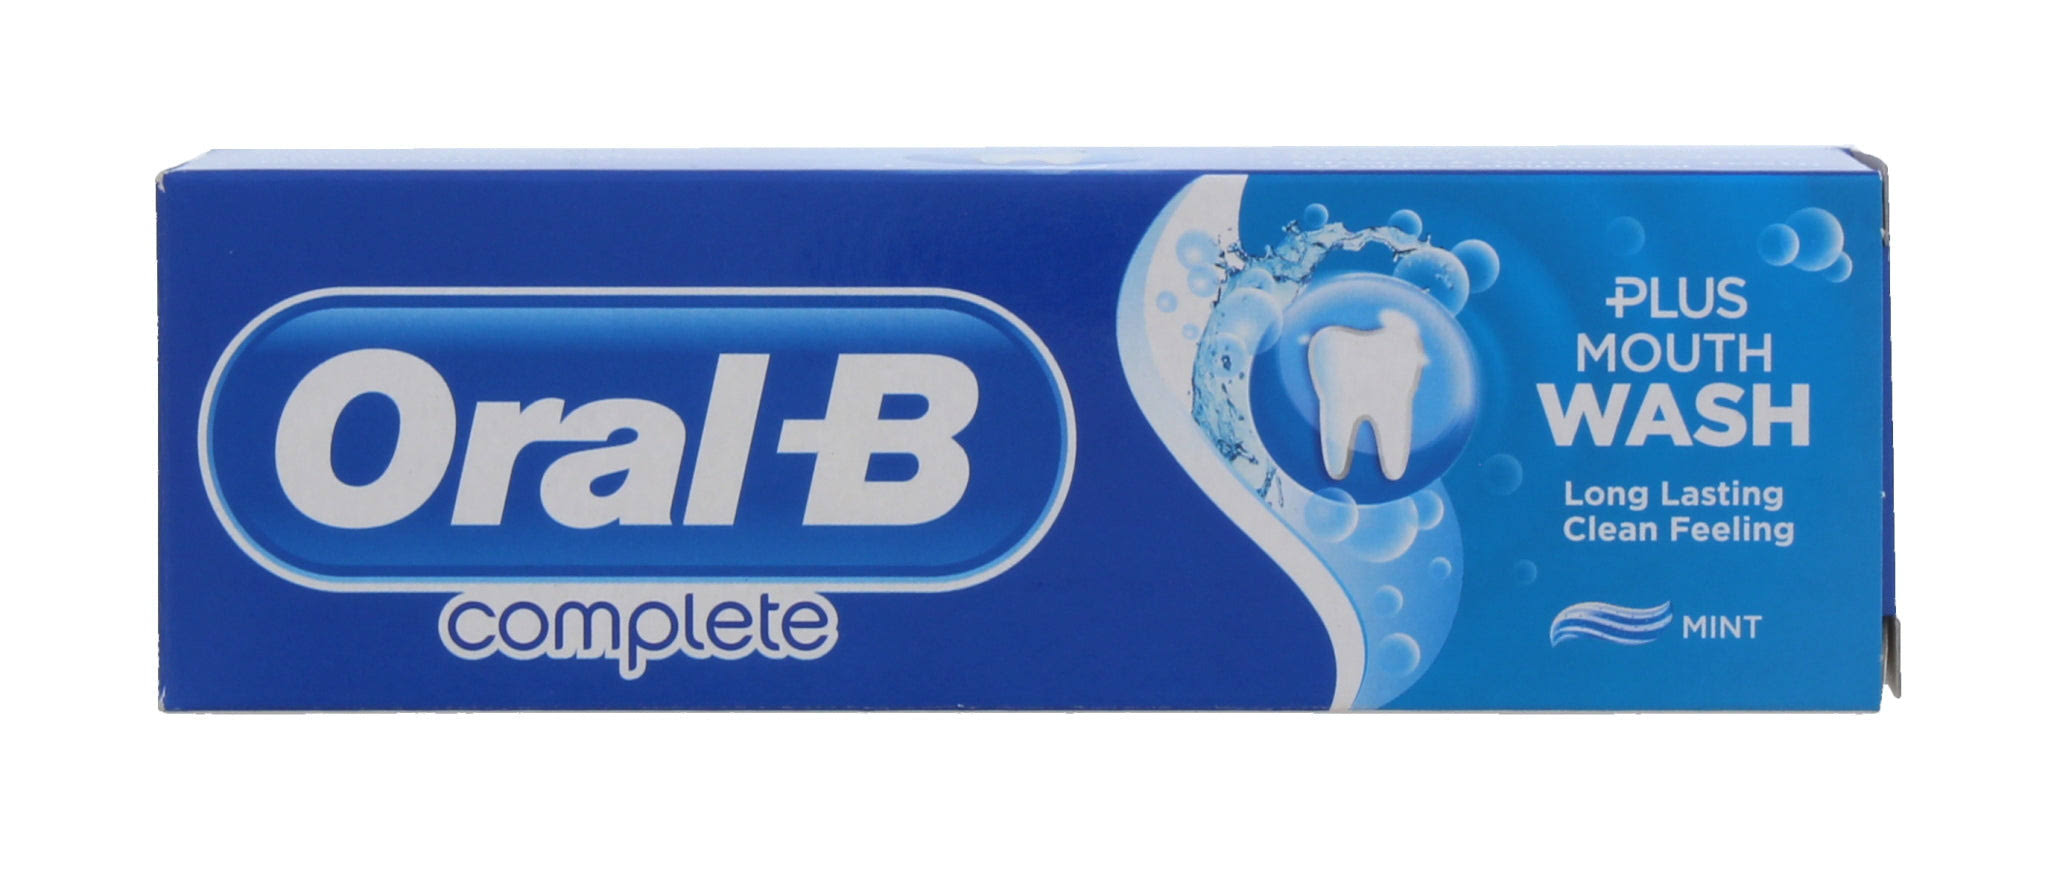 Oral-B Complete Toothpaste - Extreme Mint, 75ml